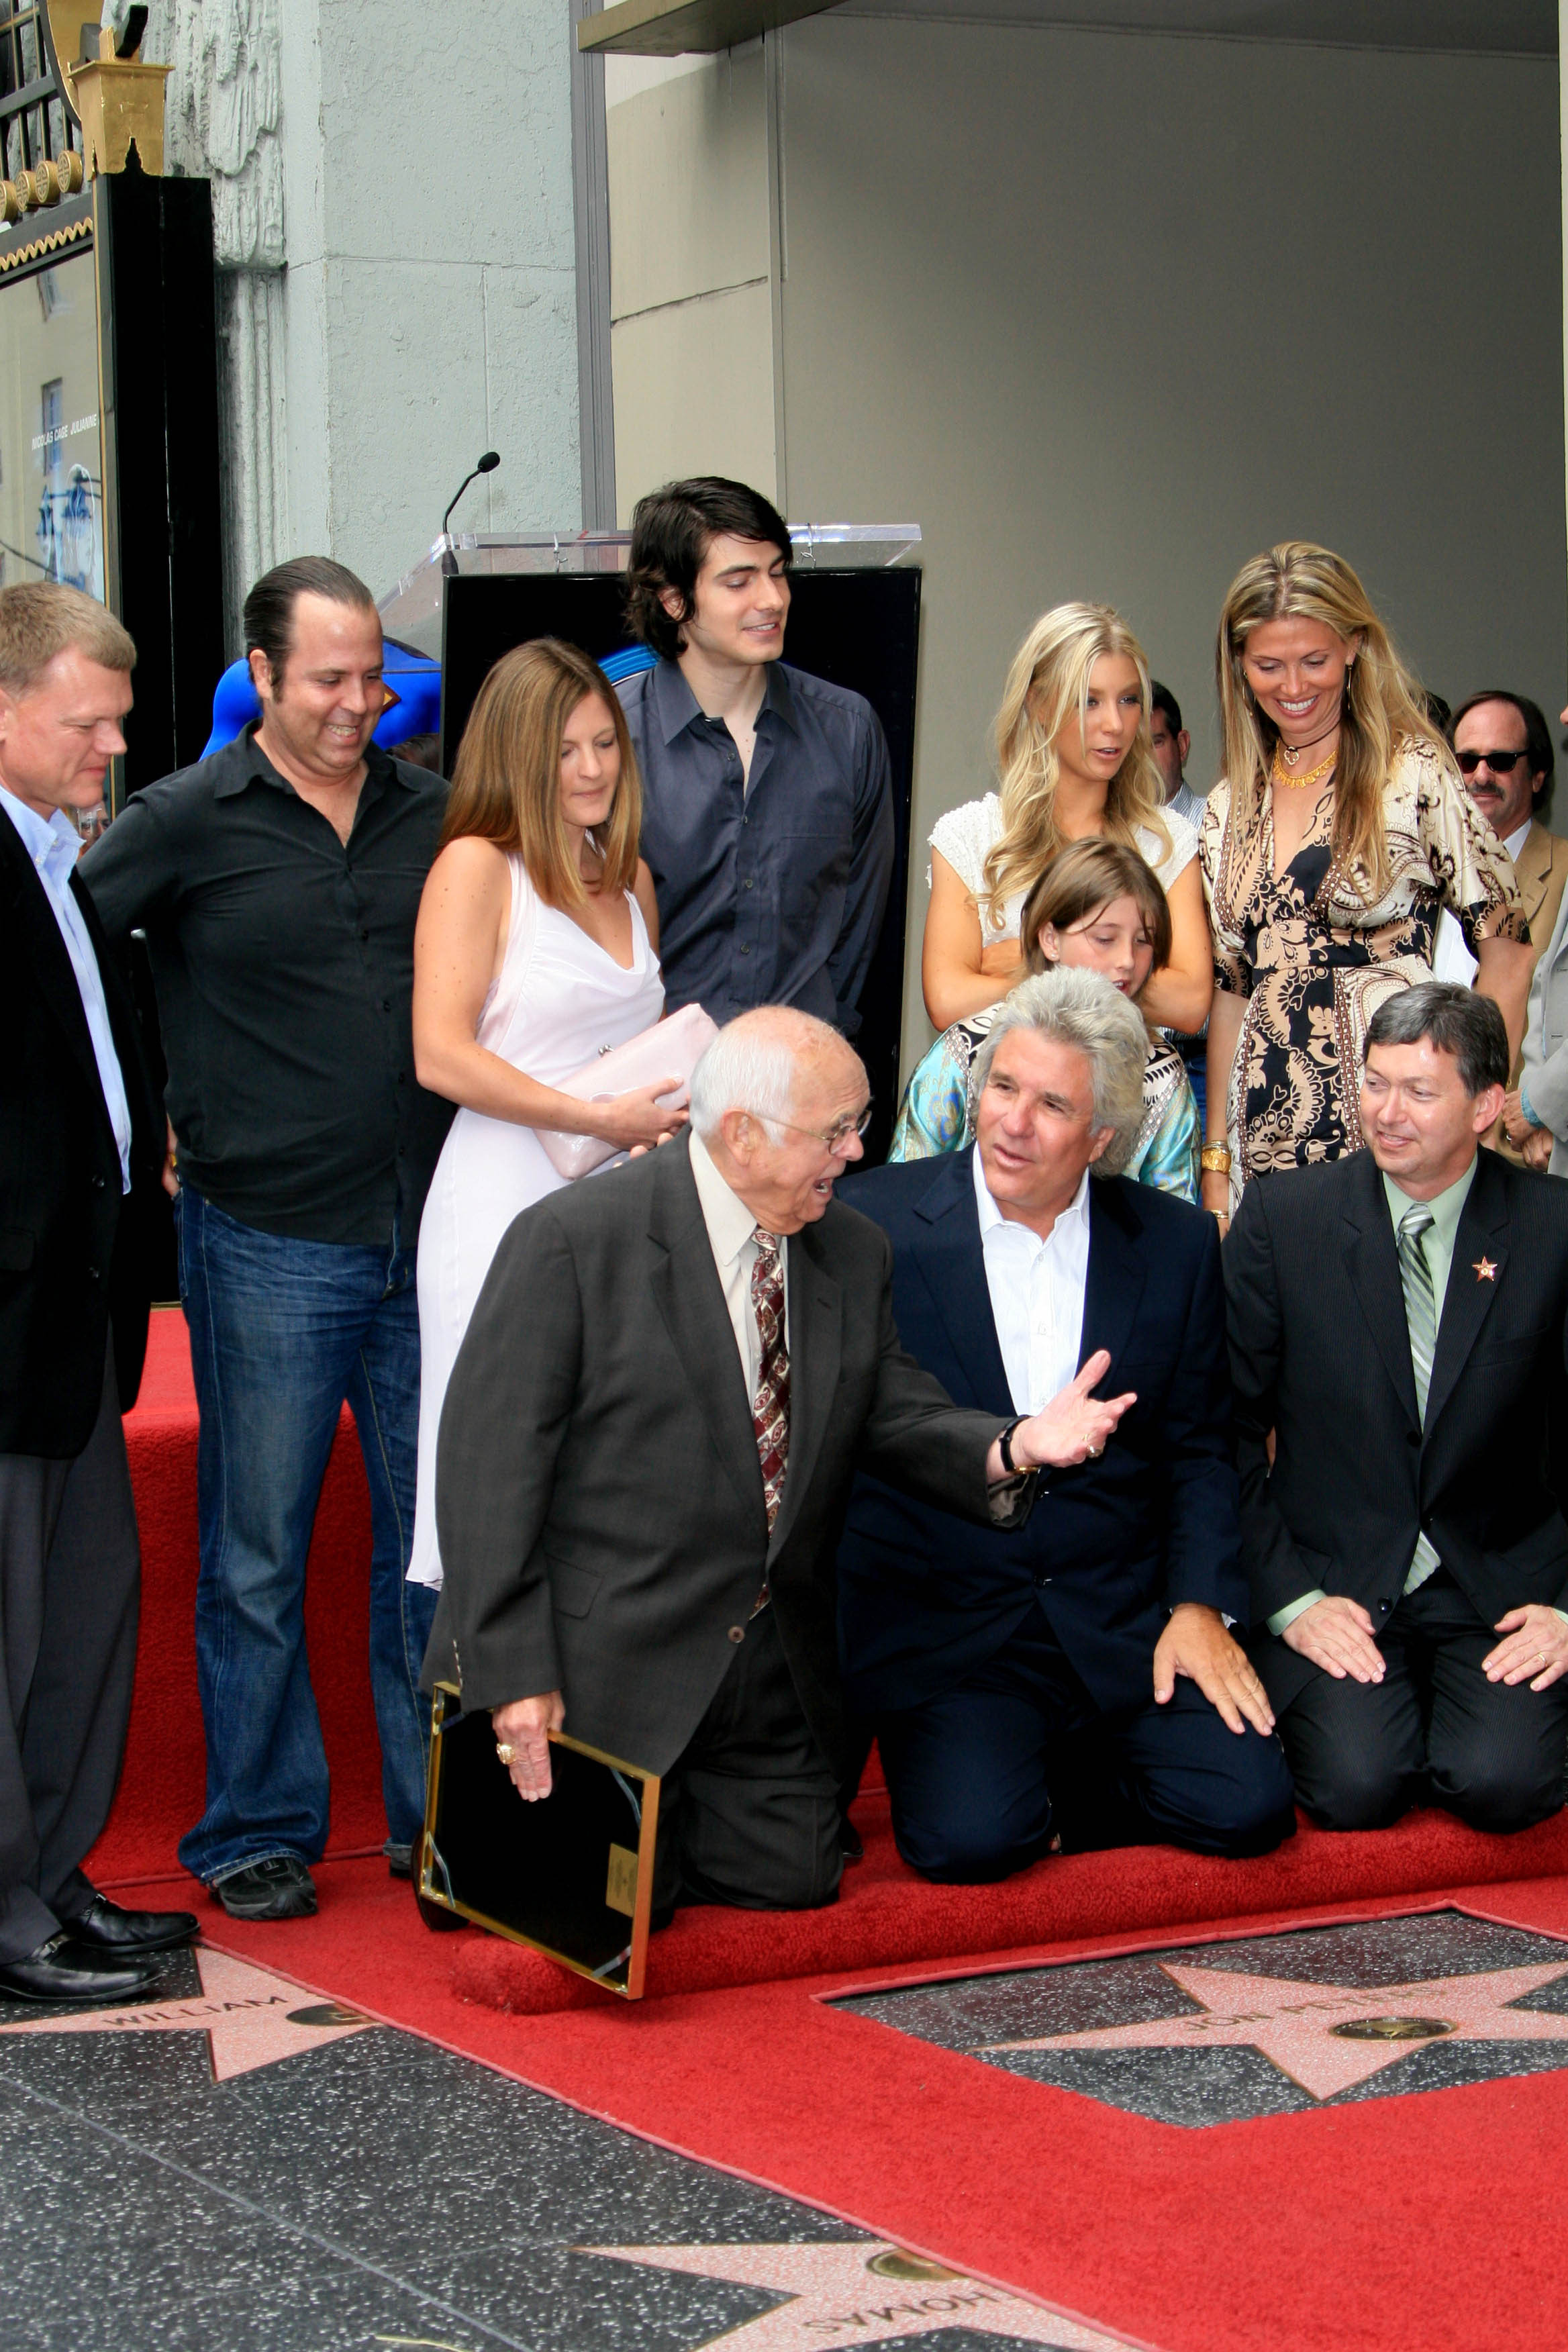 Jon Peters Receives a Star on Walk of Fame with Family - Johnny Grant, Jon Peters, Leron Gubler in the Front, Jon Peters, Christopher Peters, Daniella Peters, Caleigh Peters, Kendyl Peters, Mindy Peters and Brandon Routh